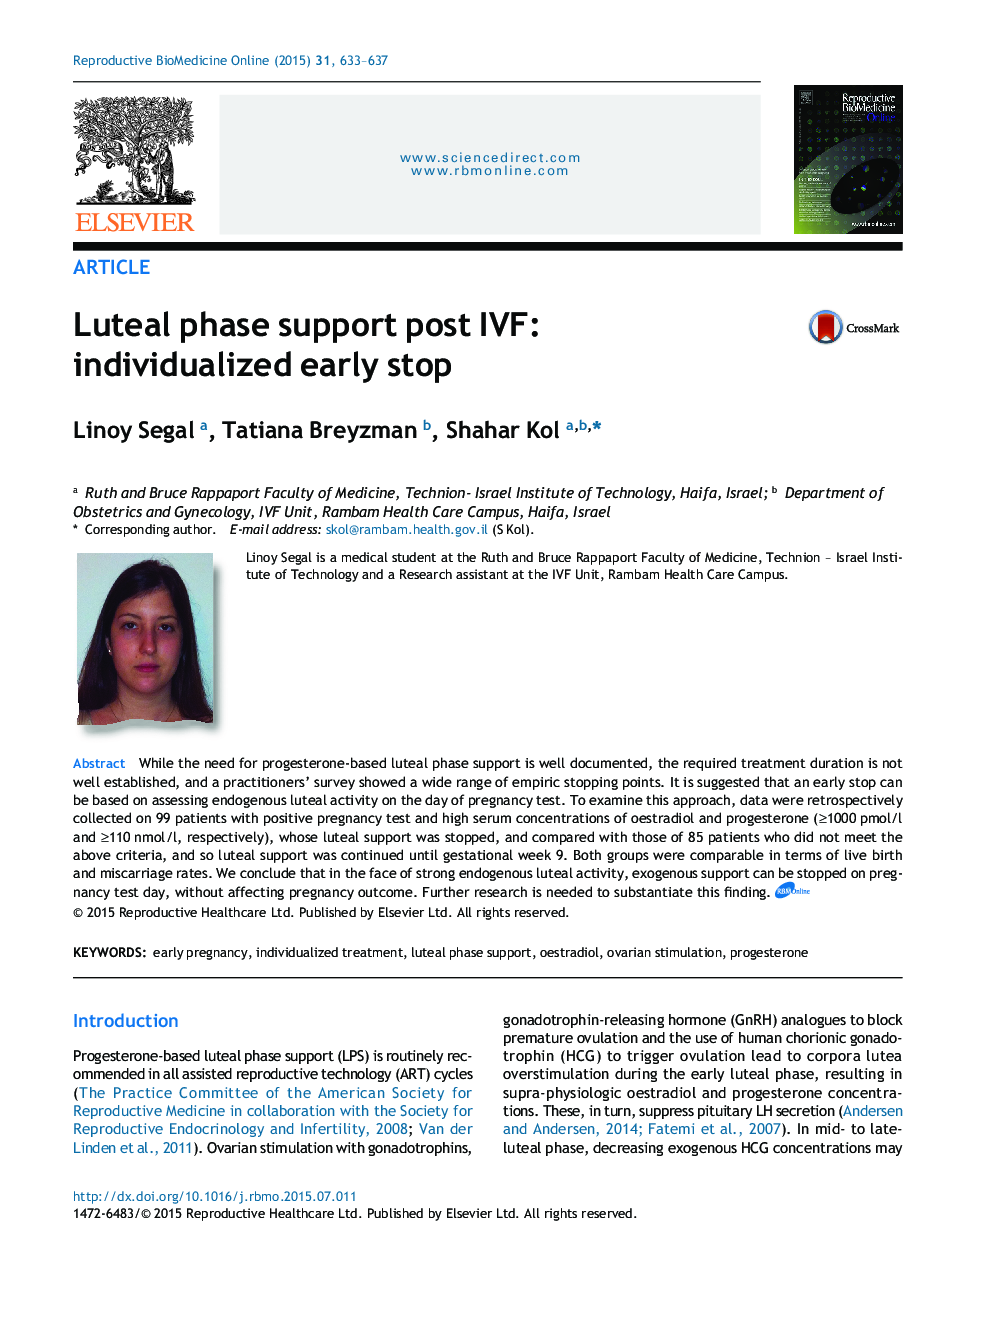 Luteal phase support post IVF: individualized early stop